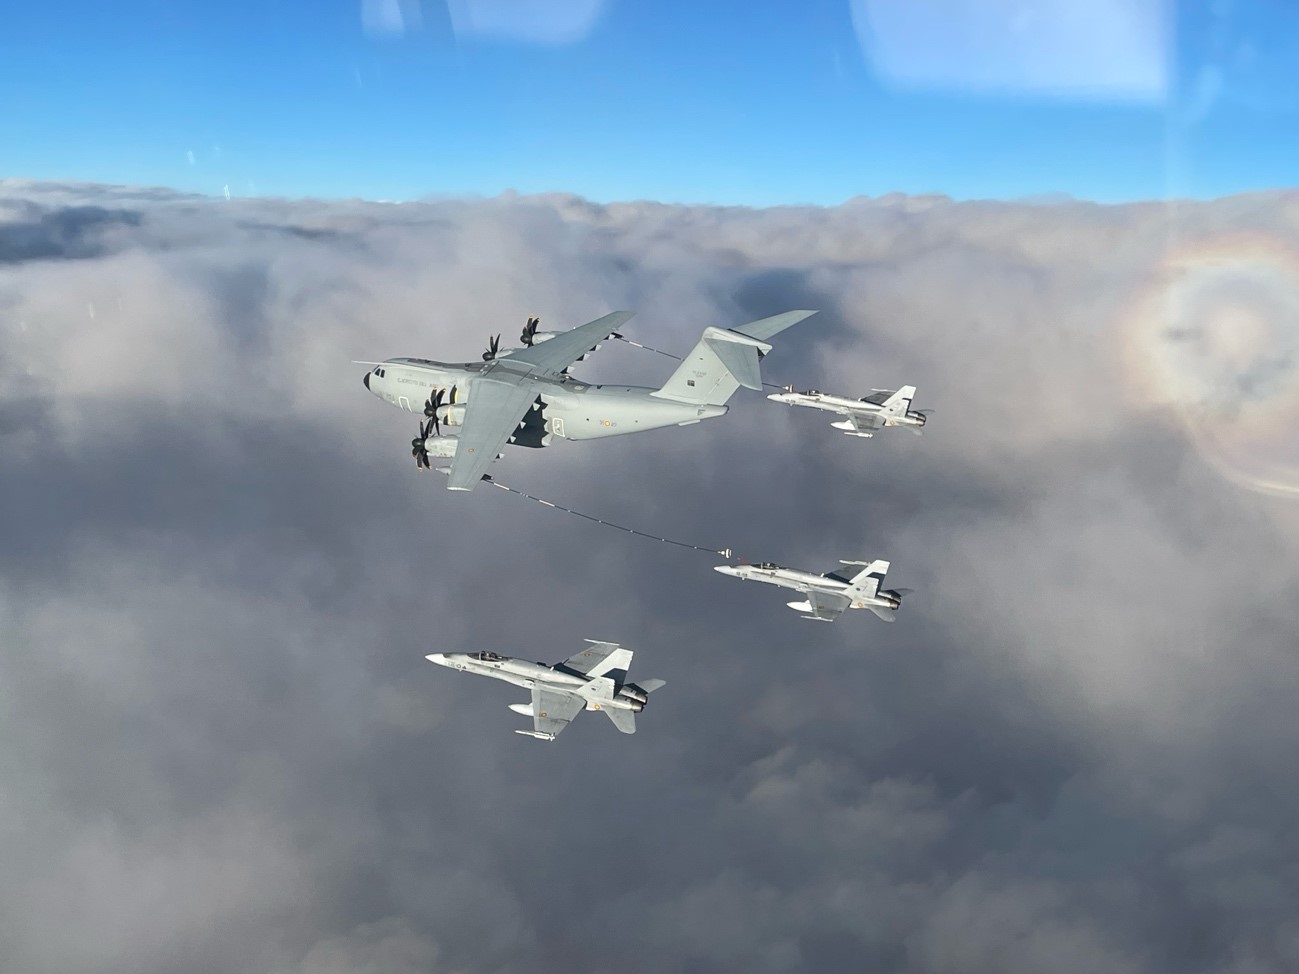 F18M refuelling an A400M from the 'Ala 31'